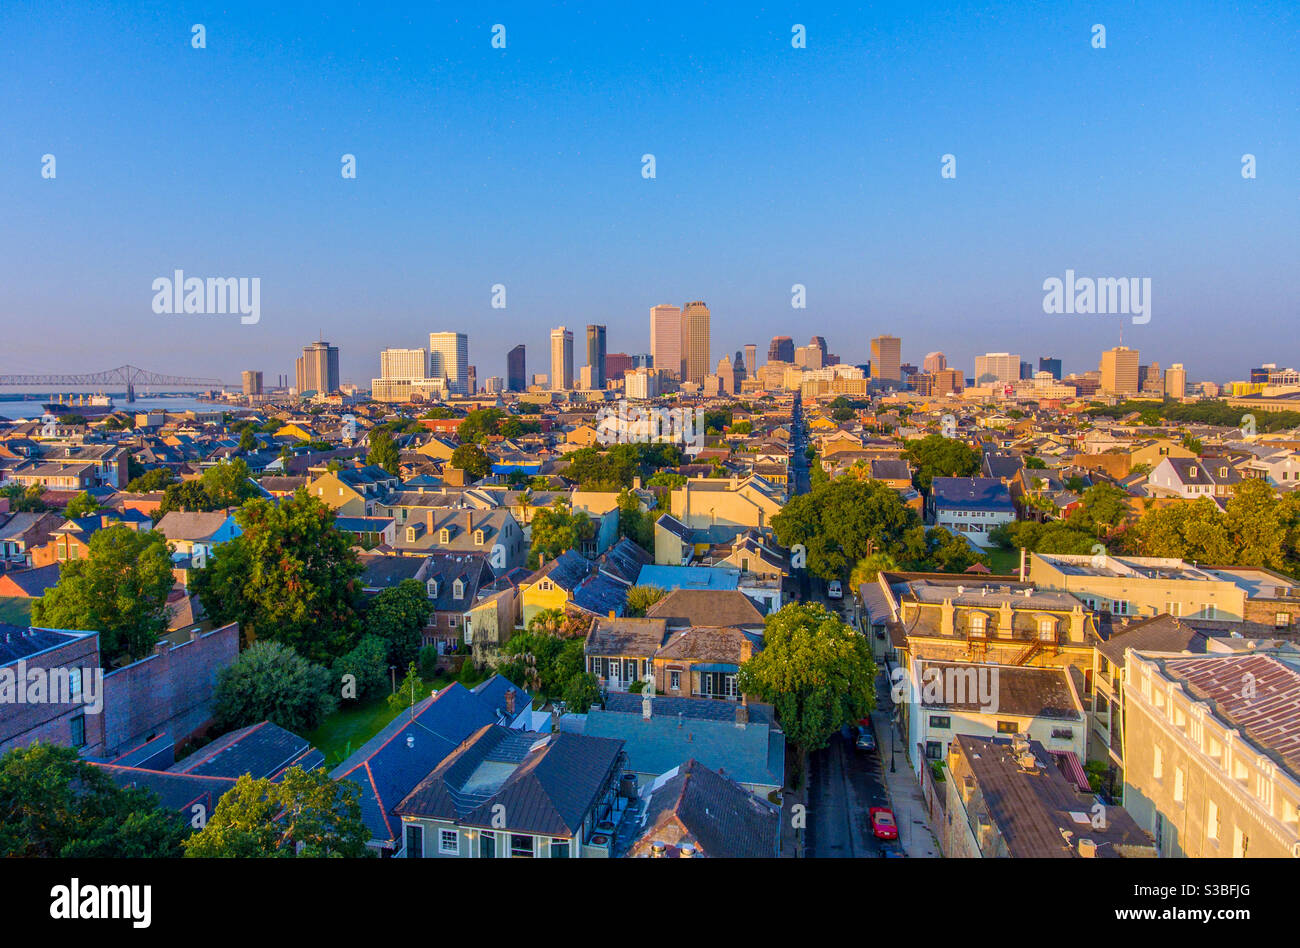 Sunrise at downtown New Orleans, Louisiana Stock Photo